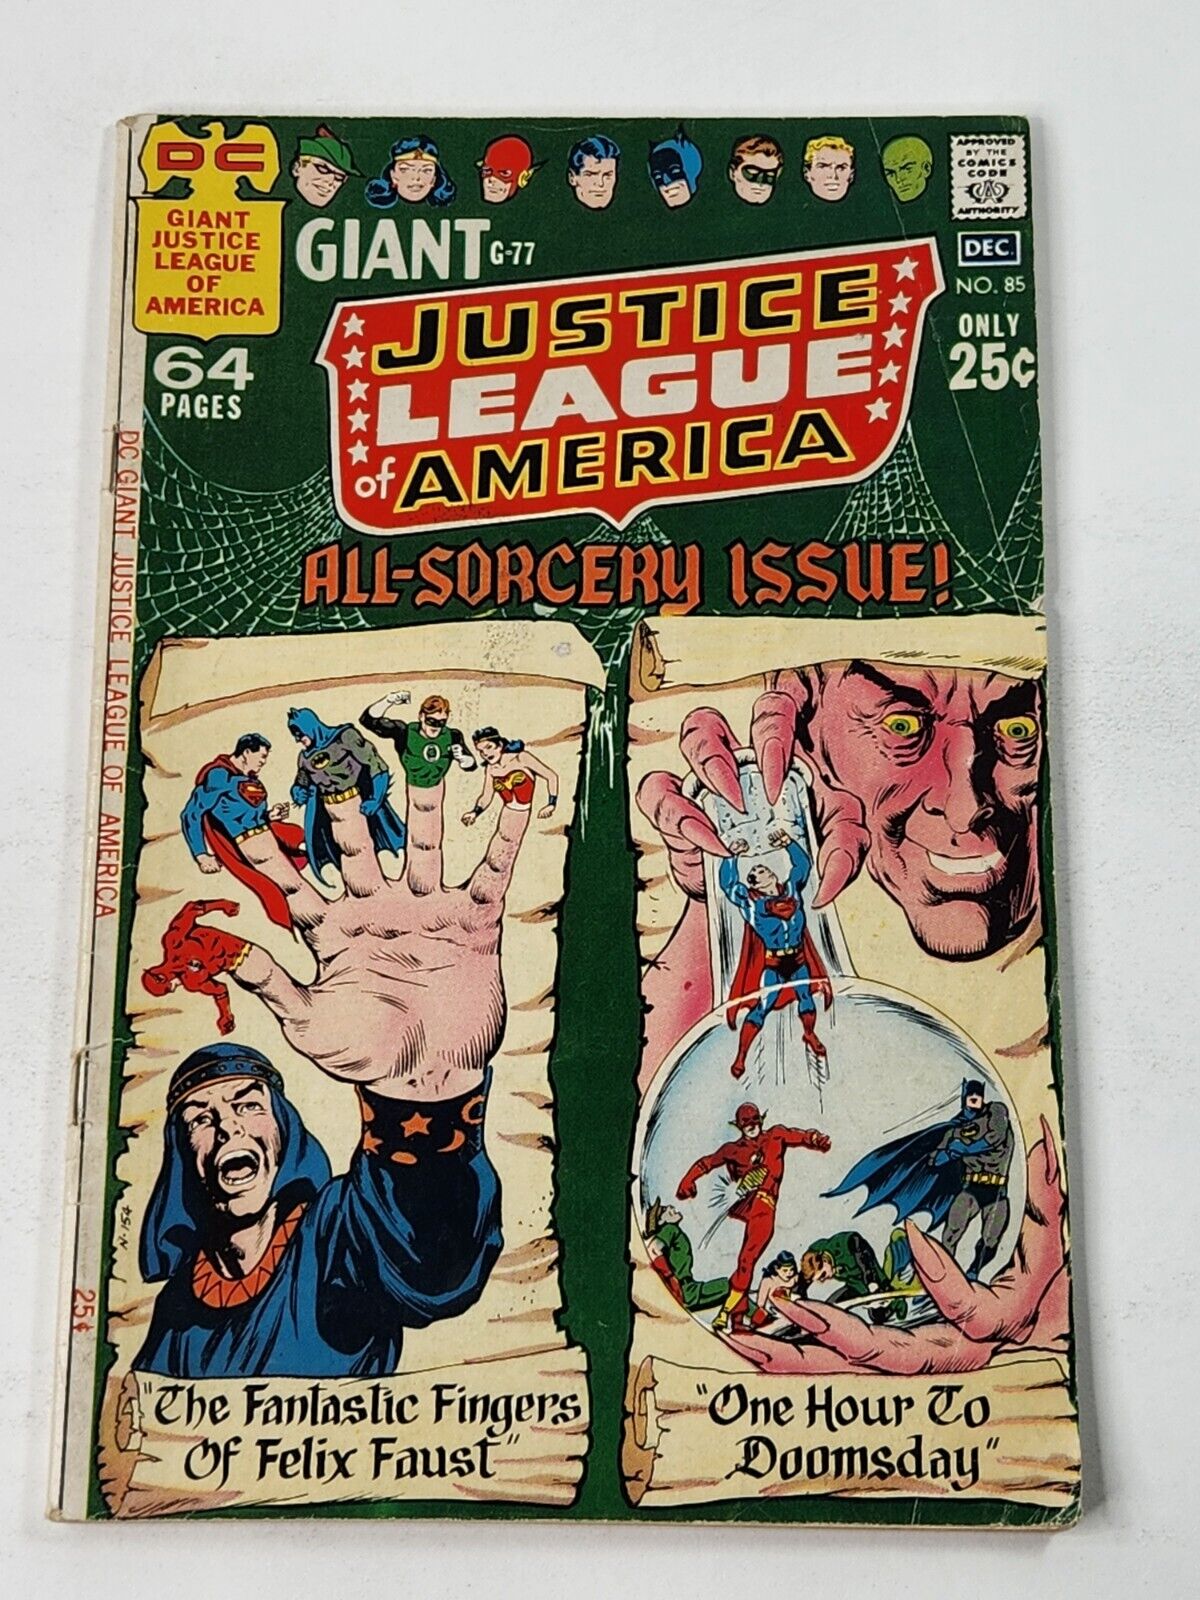 Justice League of America 85 DC Comics 64 Page Giant Early Bronze Age 1970